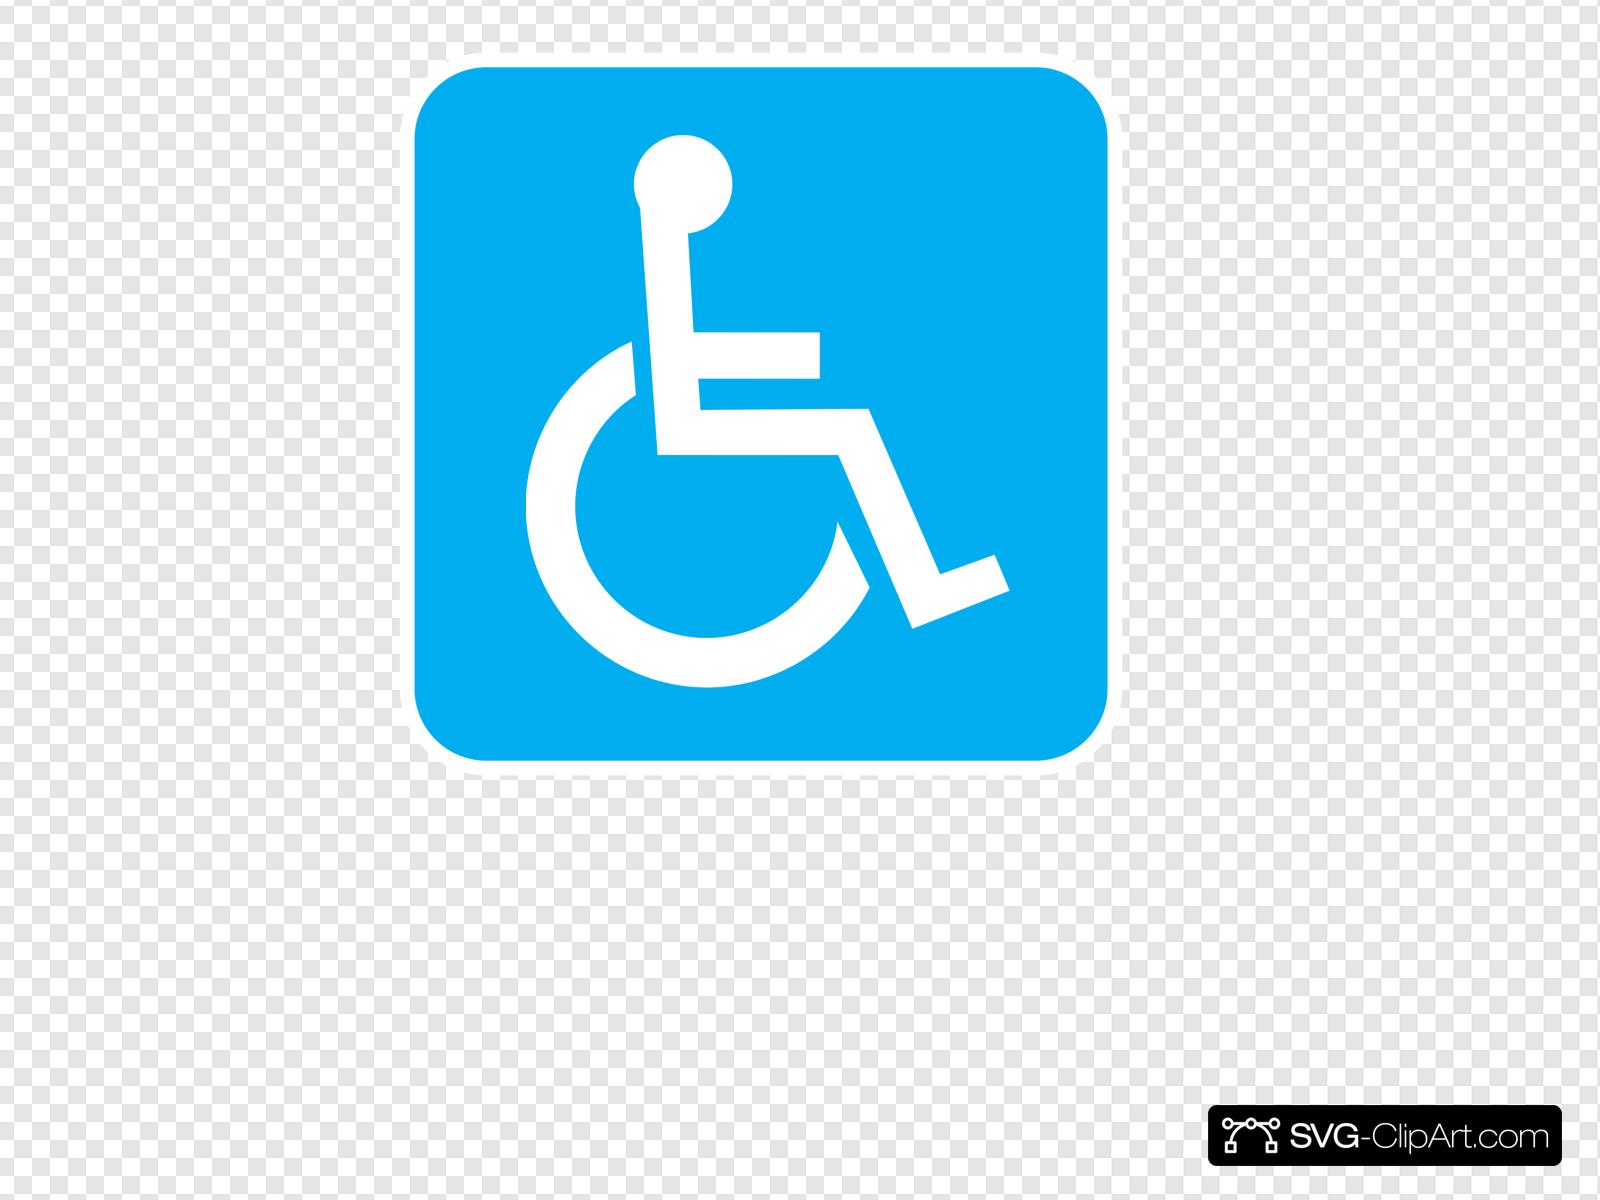 Blue Wheelchair Clip art, Icon and SVG